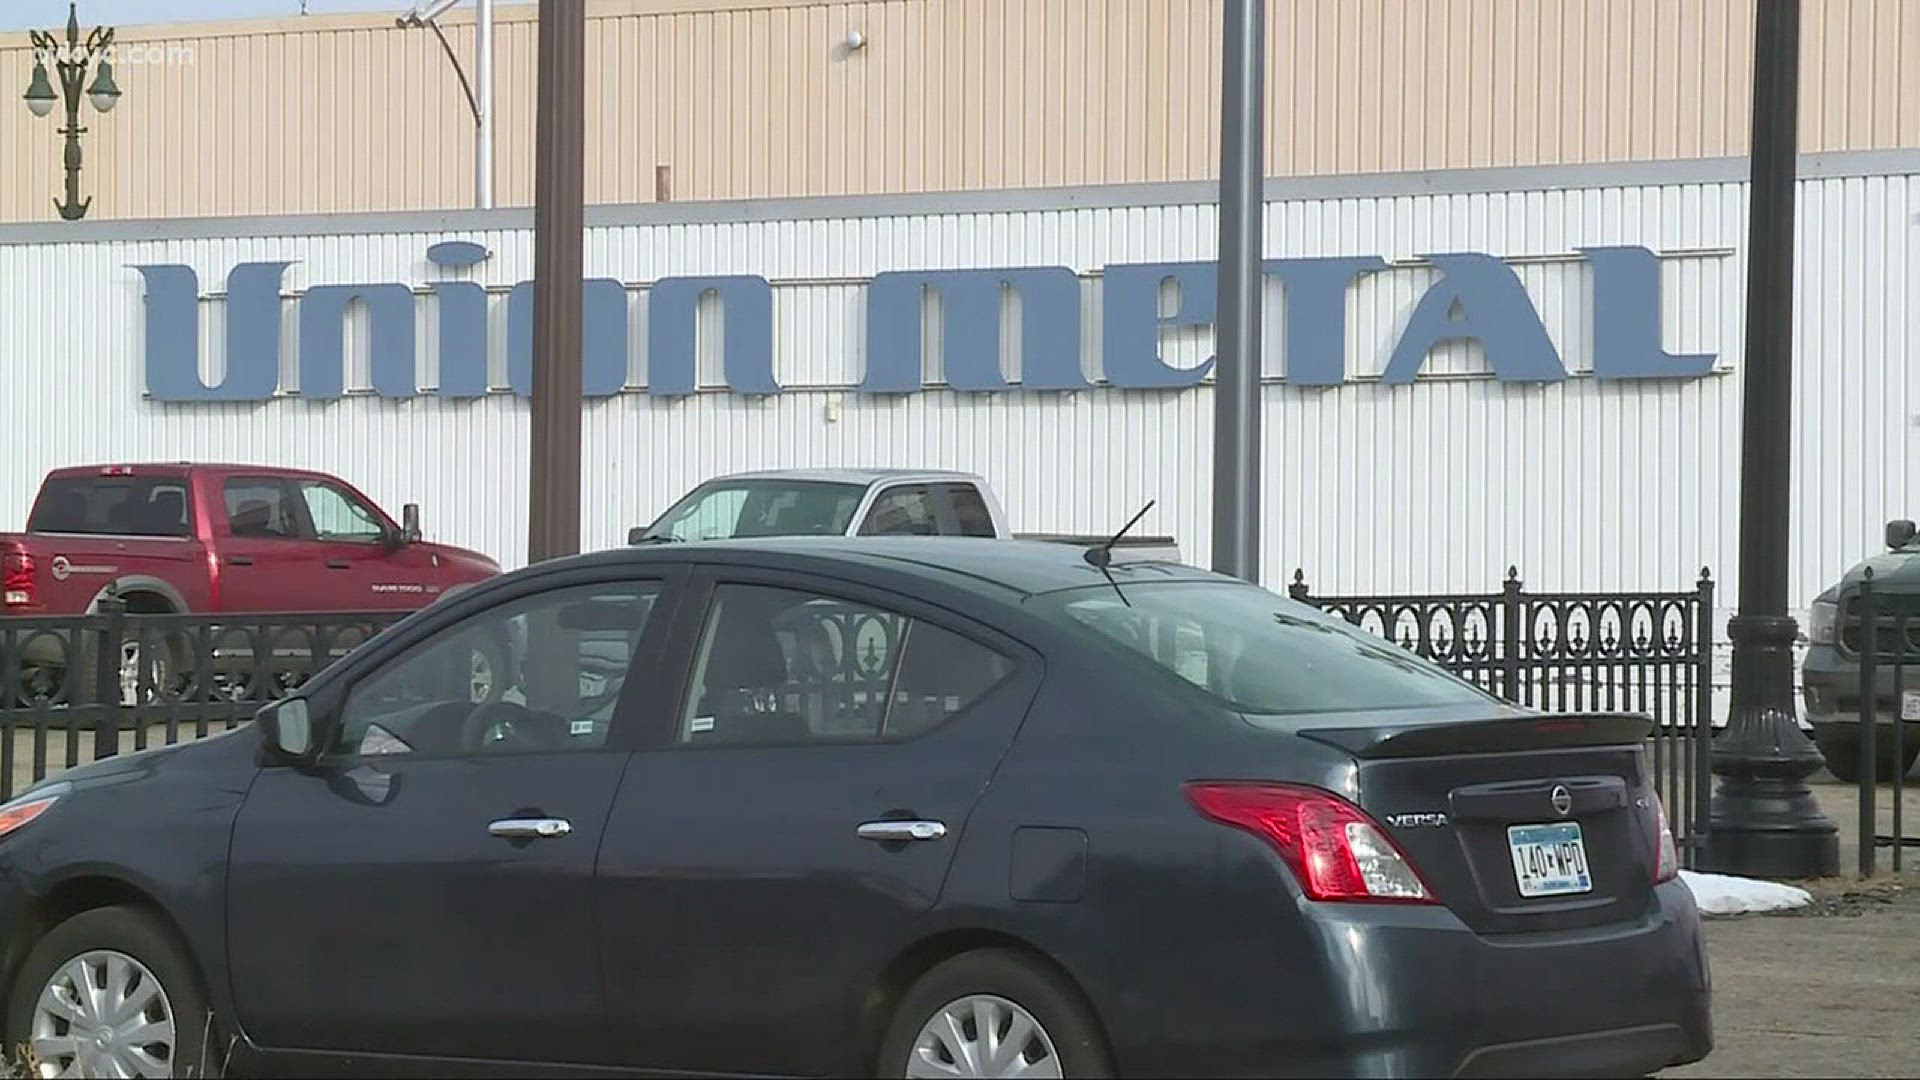 Union Metal in Canton plans to close, lay off more than 300 employees